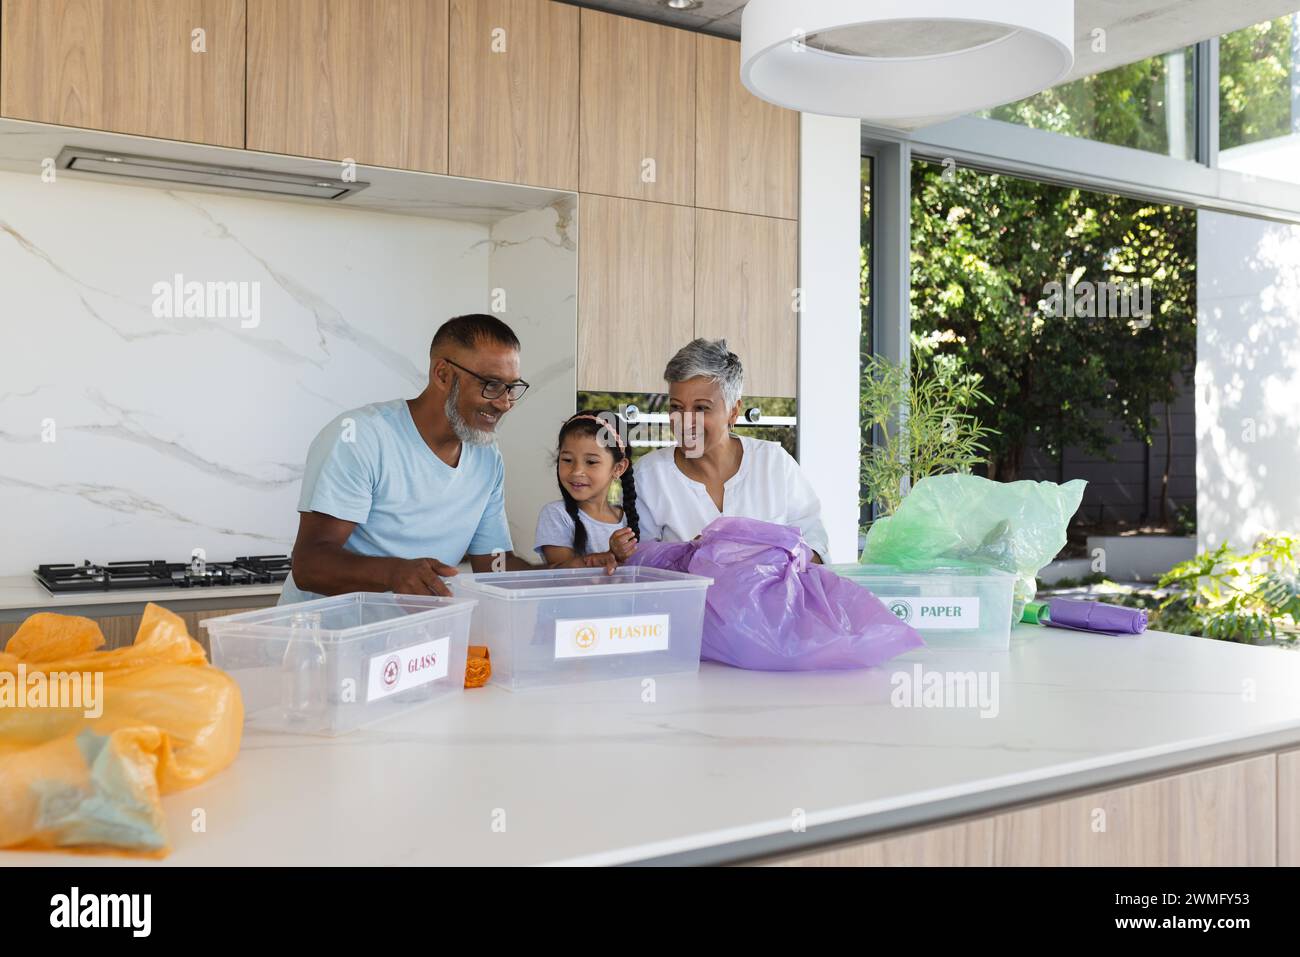 Biracial grandparents and granddaughter sort recycling in a bright kitchen, with copy space Stock Photo